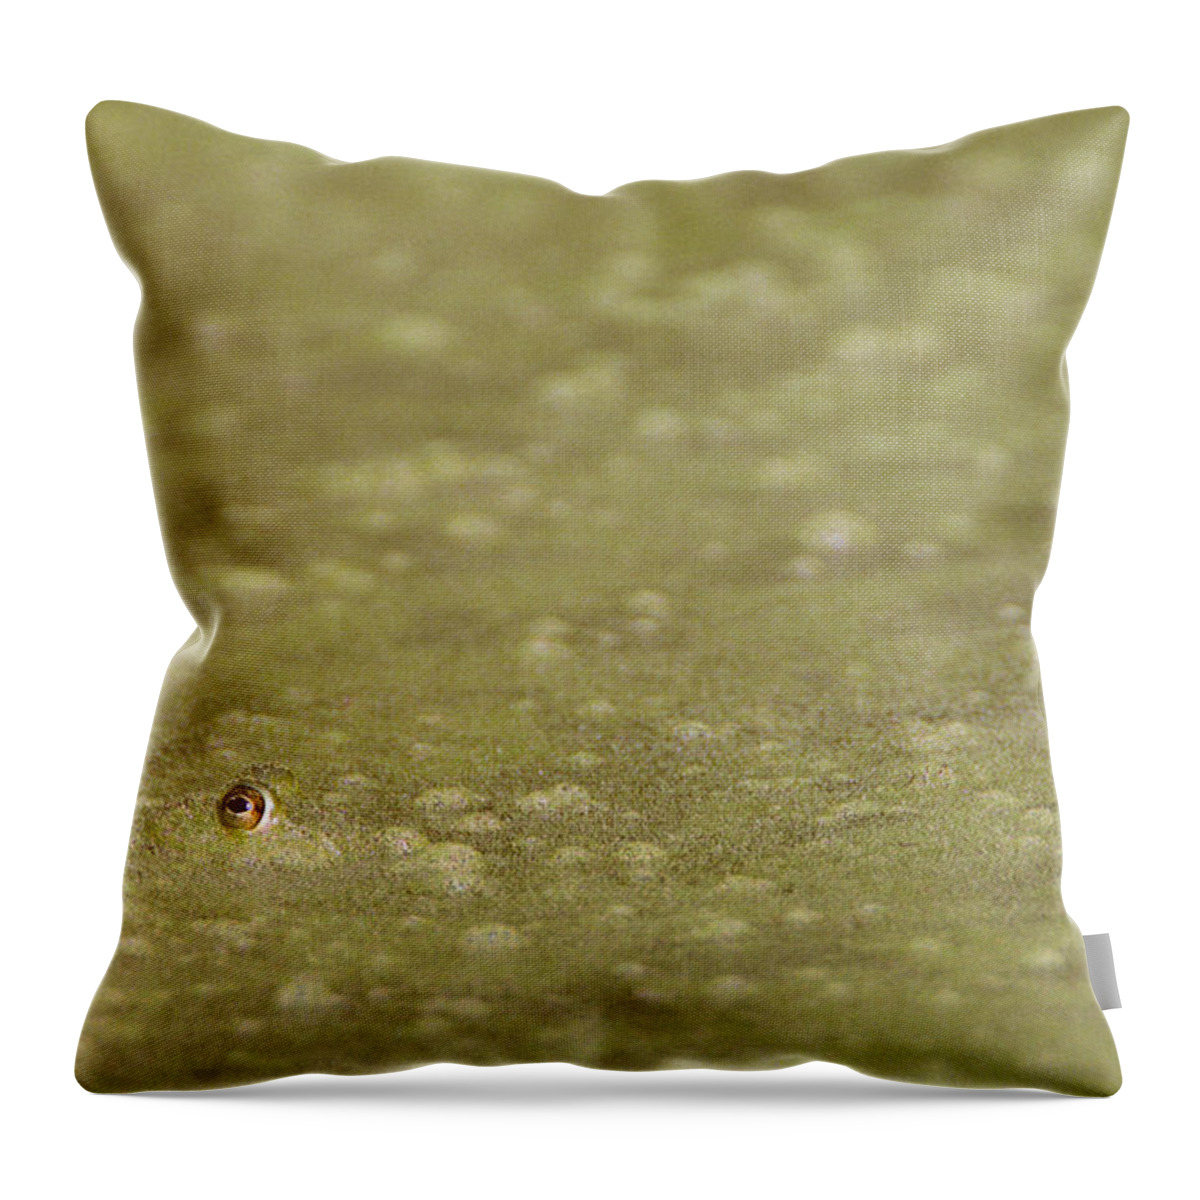 Amphibian Throw Pillow featuring the photograph A Frogs Eye in Pond Muck by John Harmon